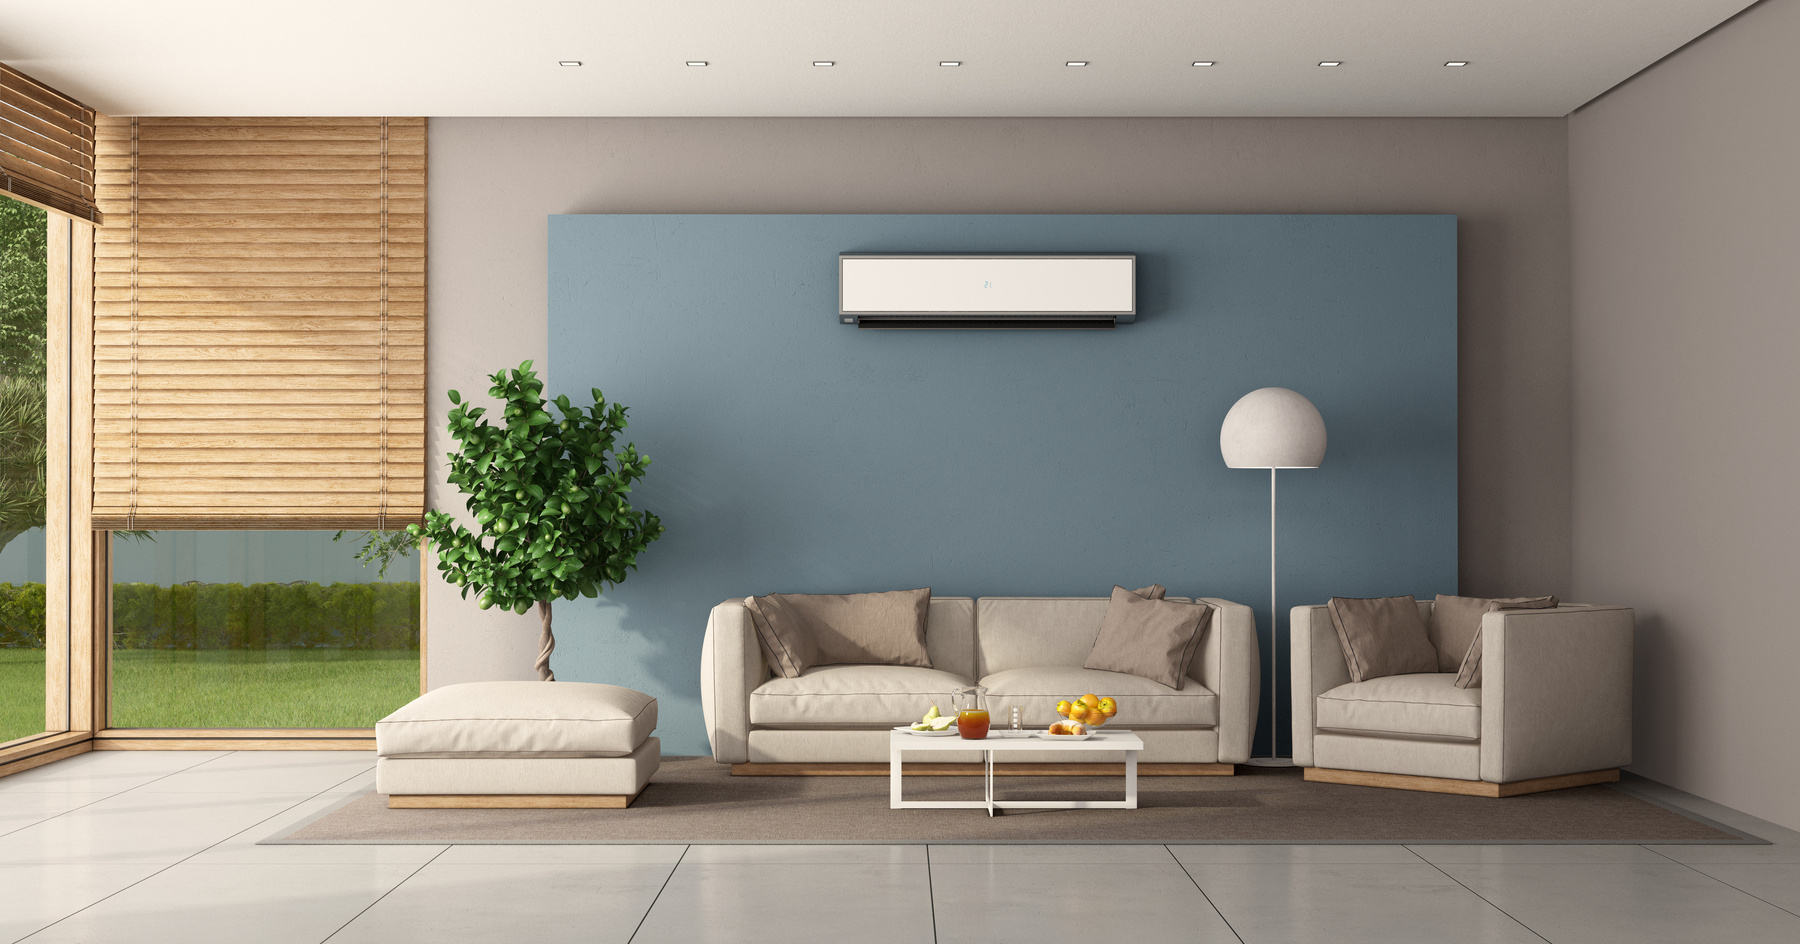 Minimalist living room with air conditioner